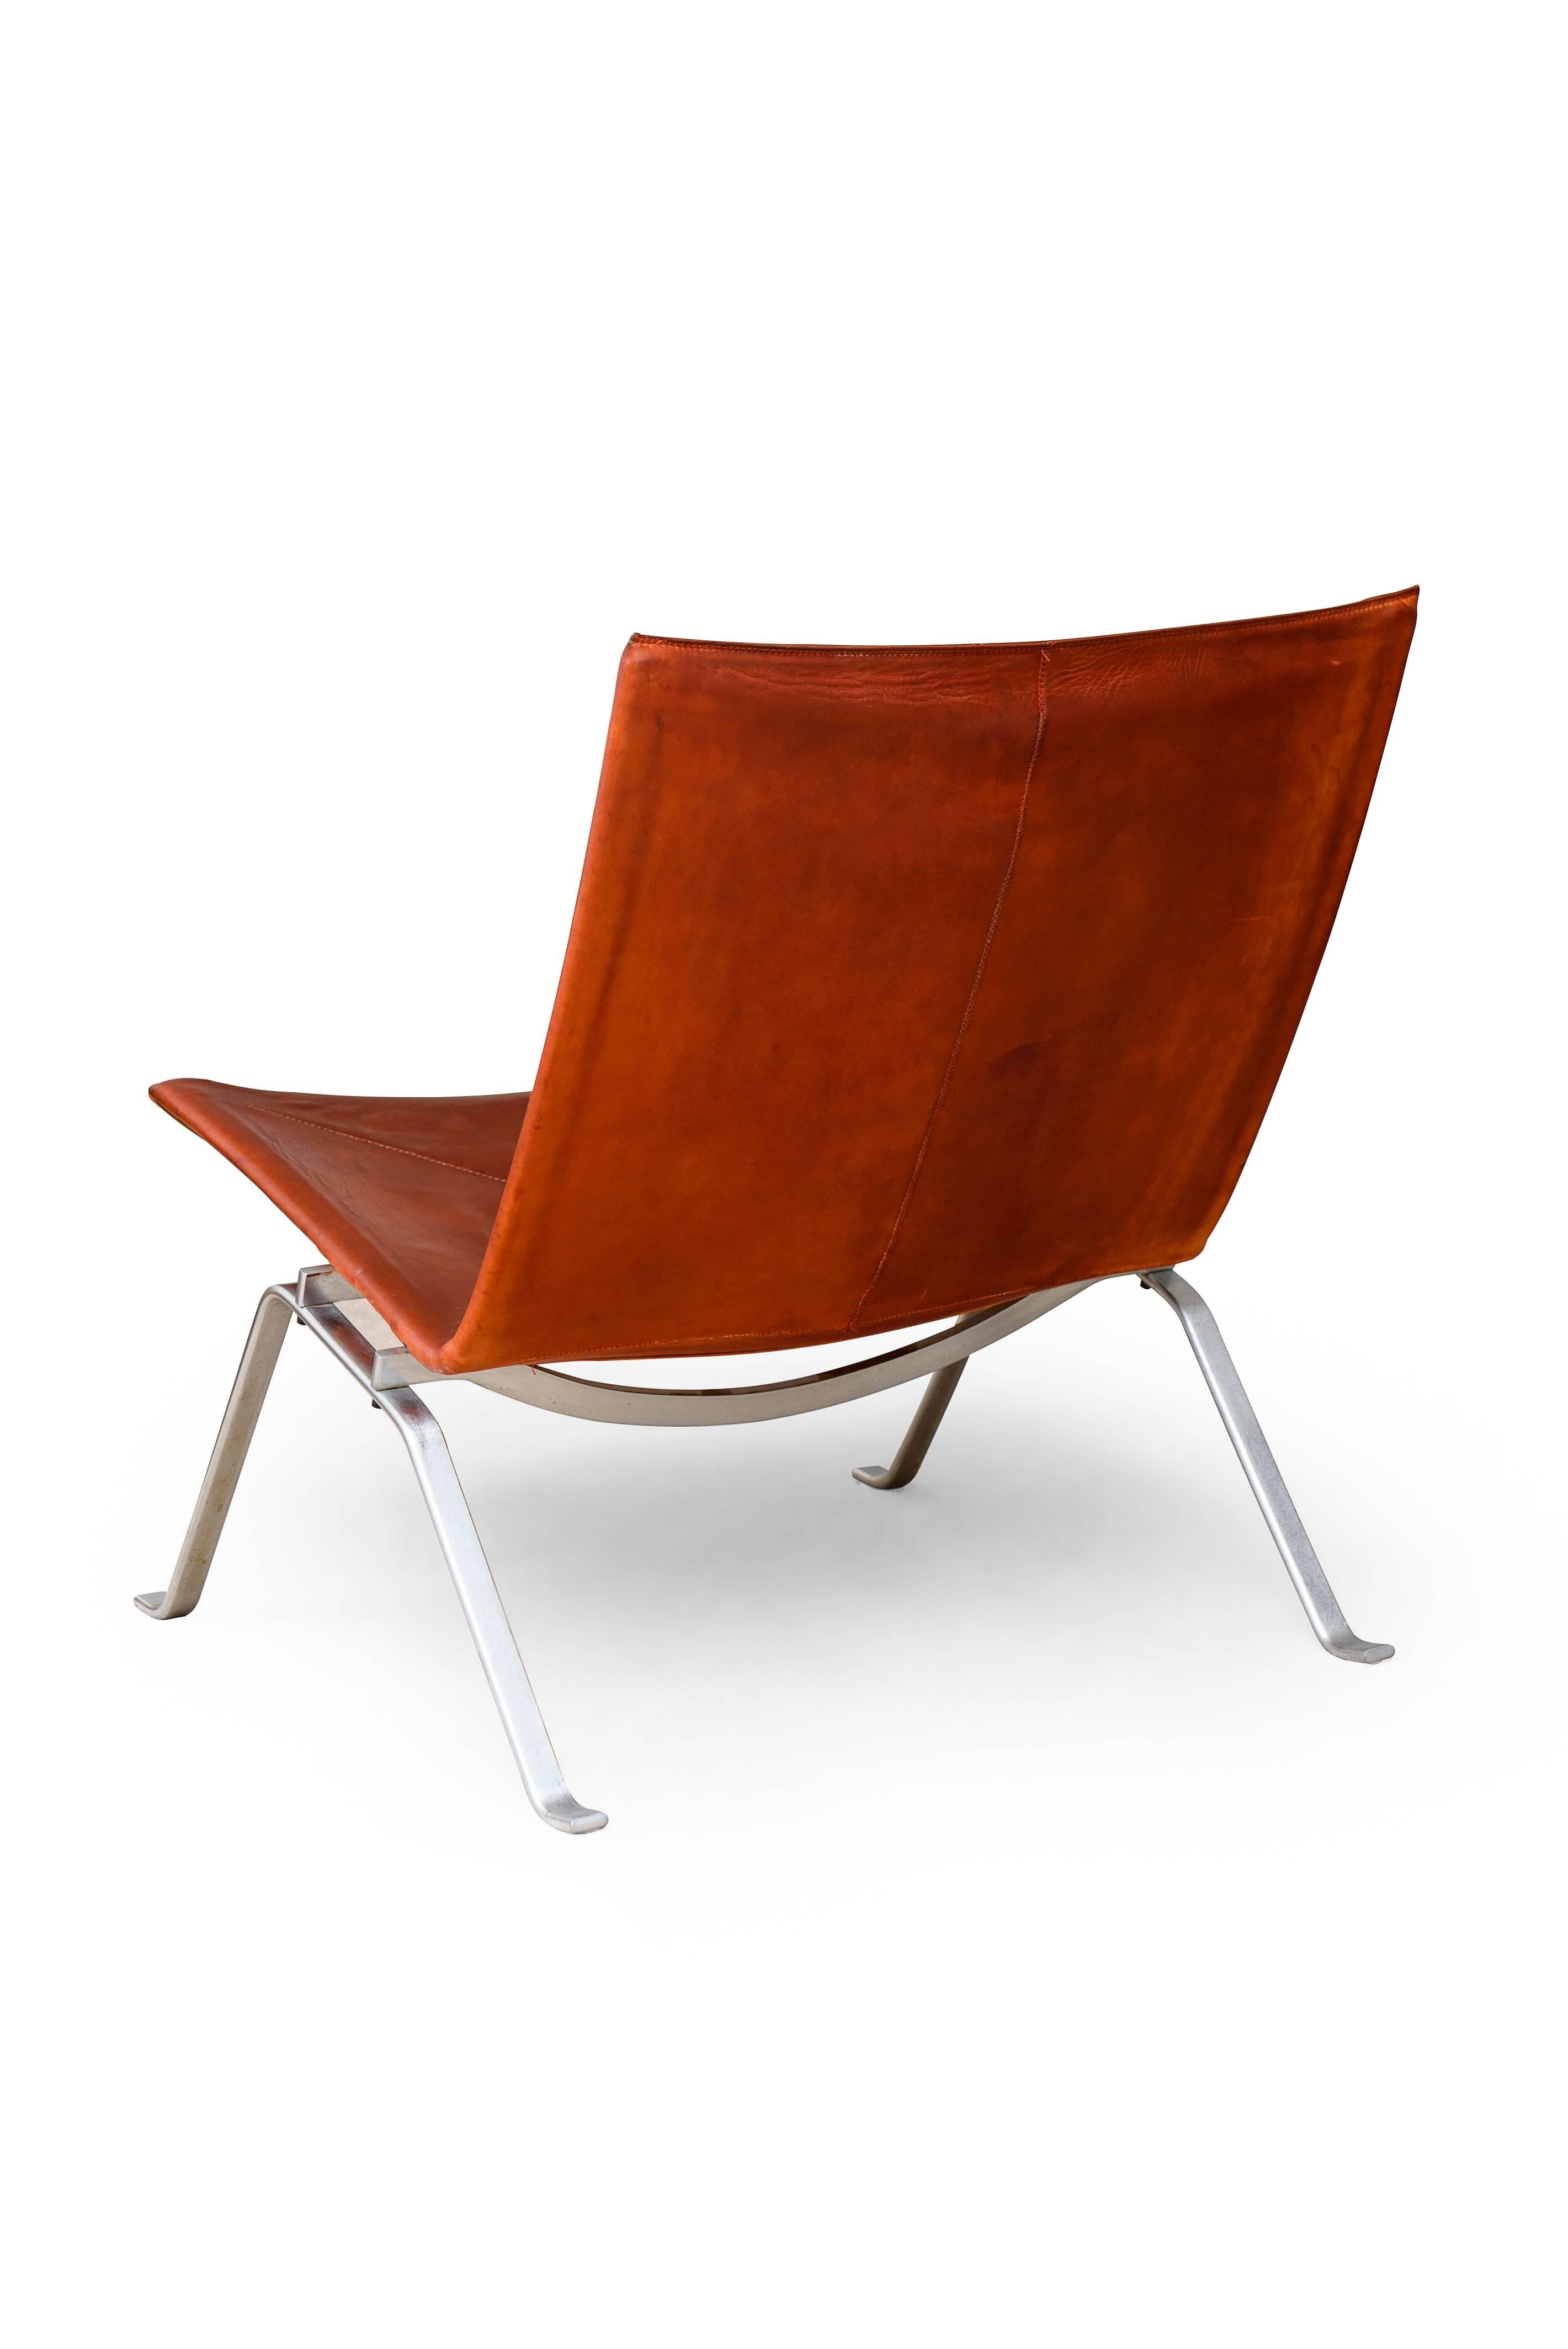 Poul Kjaerholm (1929-1980), DK.
Pair of lounge chairs ‘PK-22.’
Manufactured by E. Kold Christensen, 1955.
Steel and original leather
Measures: H 71 cm, L 63 cm, P 63 cm.

Poul Kjærholm graduated from the Copenhagen School of Arts and Crafts in